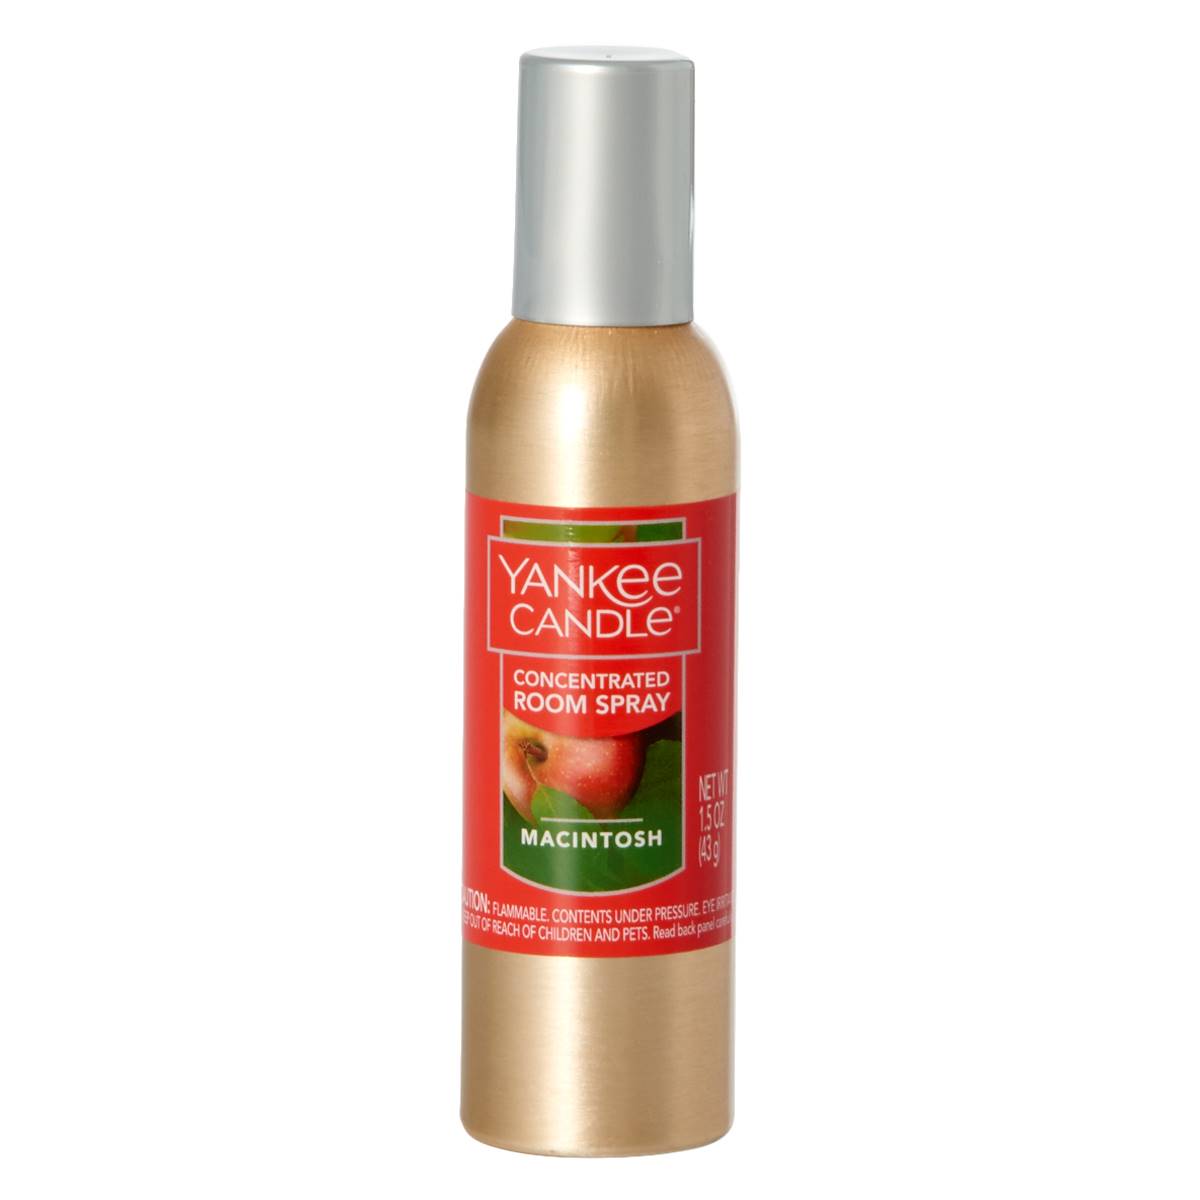 Yankee Candle(R) 1.5oz. Macintosh Concentrated Room Spray